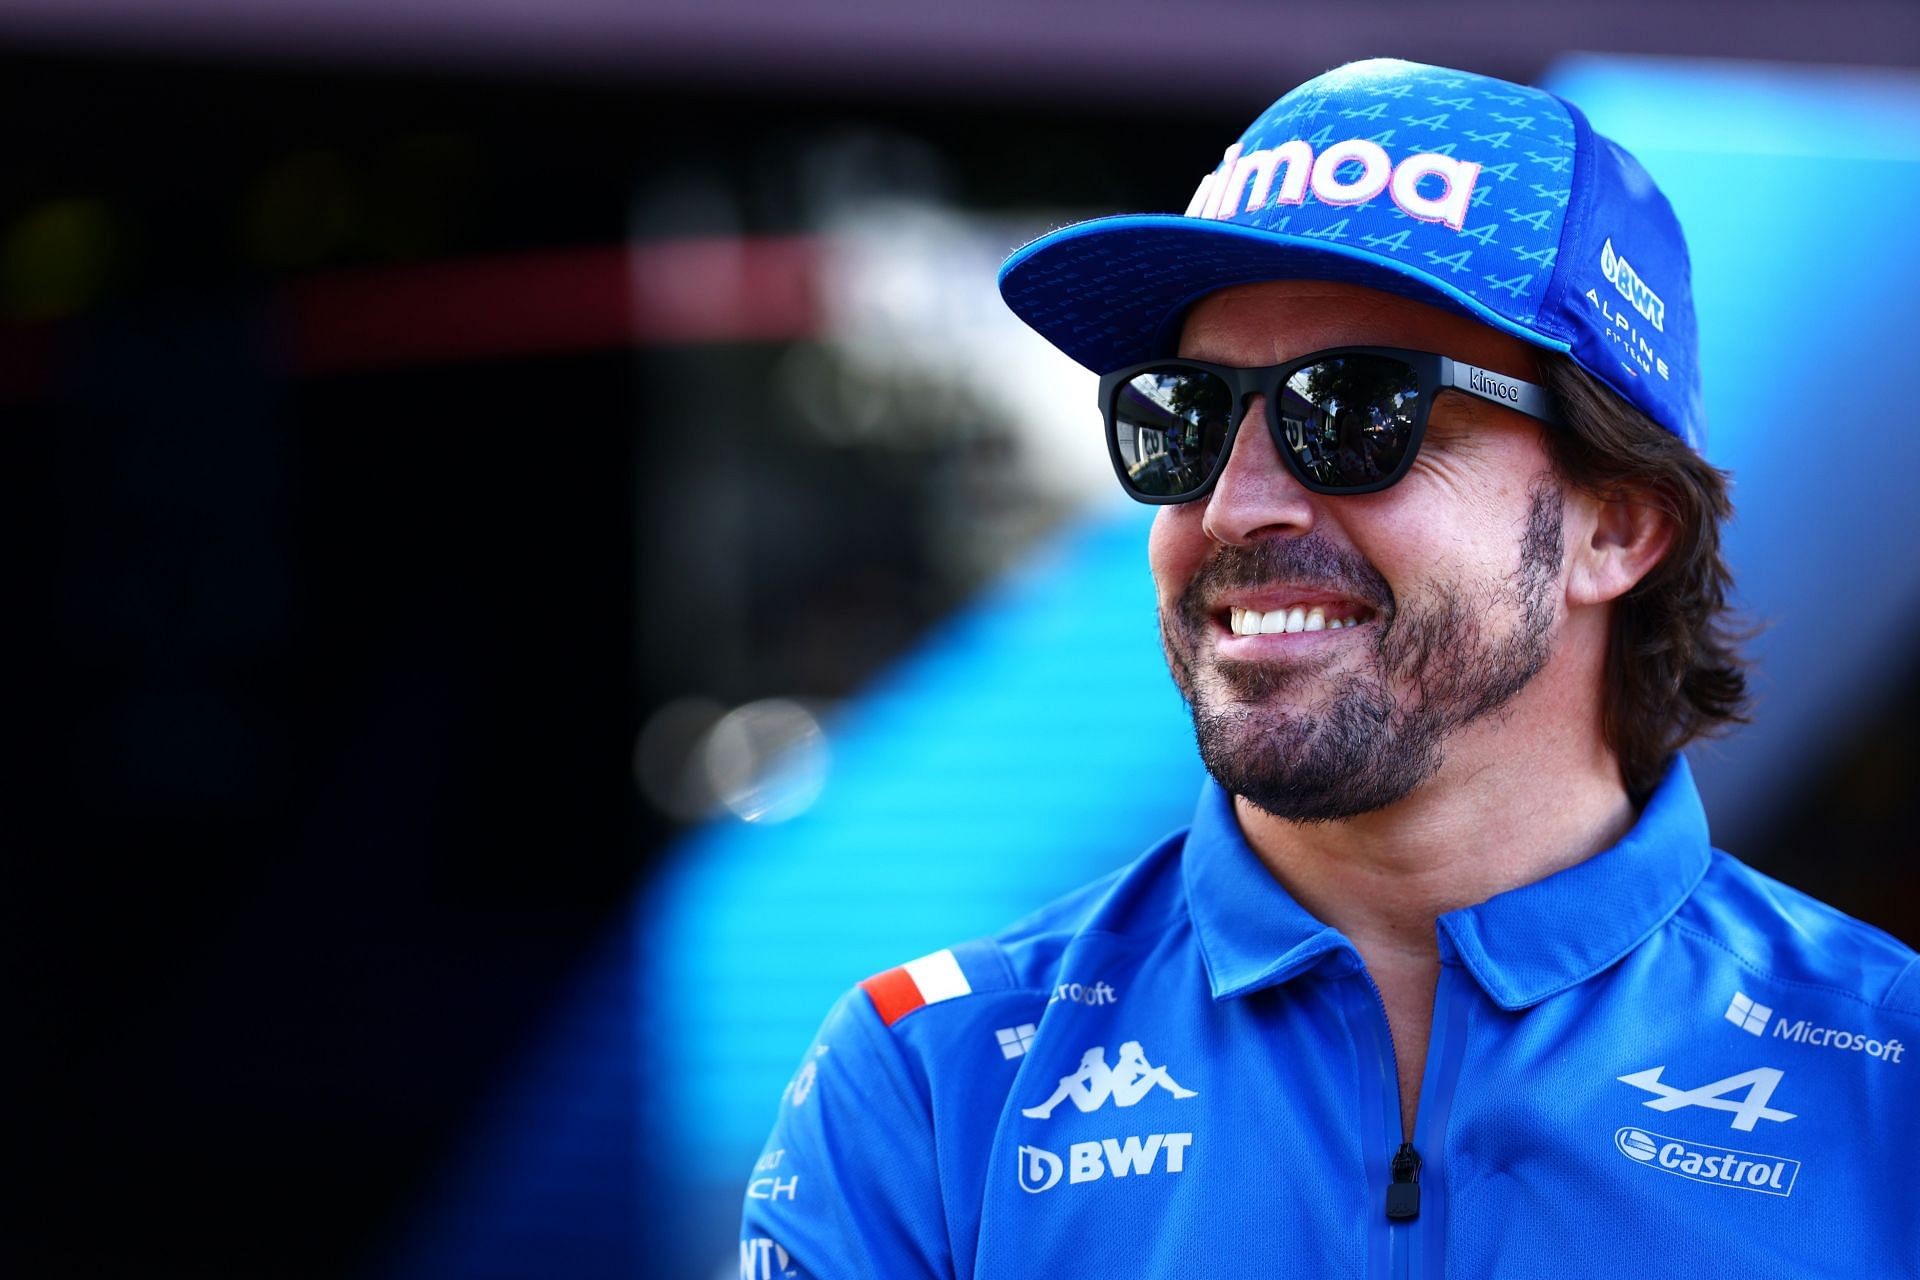 Fernando Alonso in the Paddock ahead of the F1 Grand Prix of Australia (Photo by Mark Thompson/Getty Images)